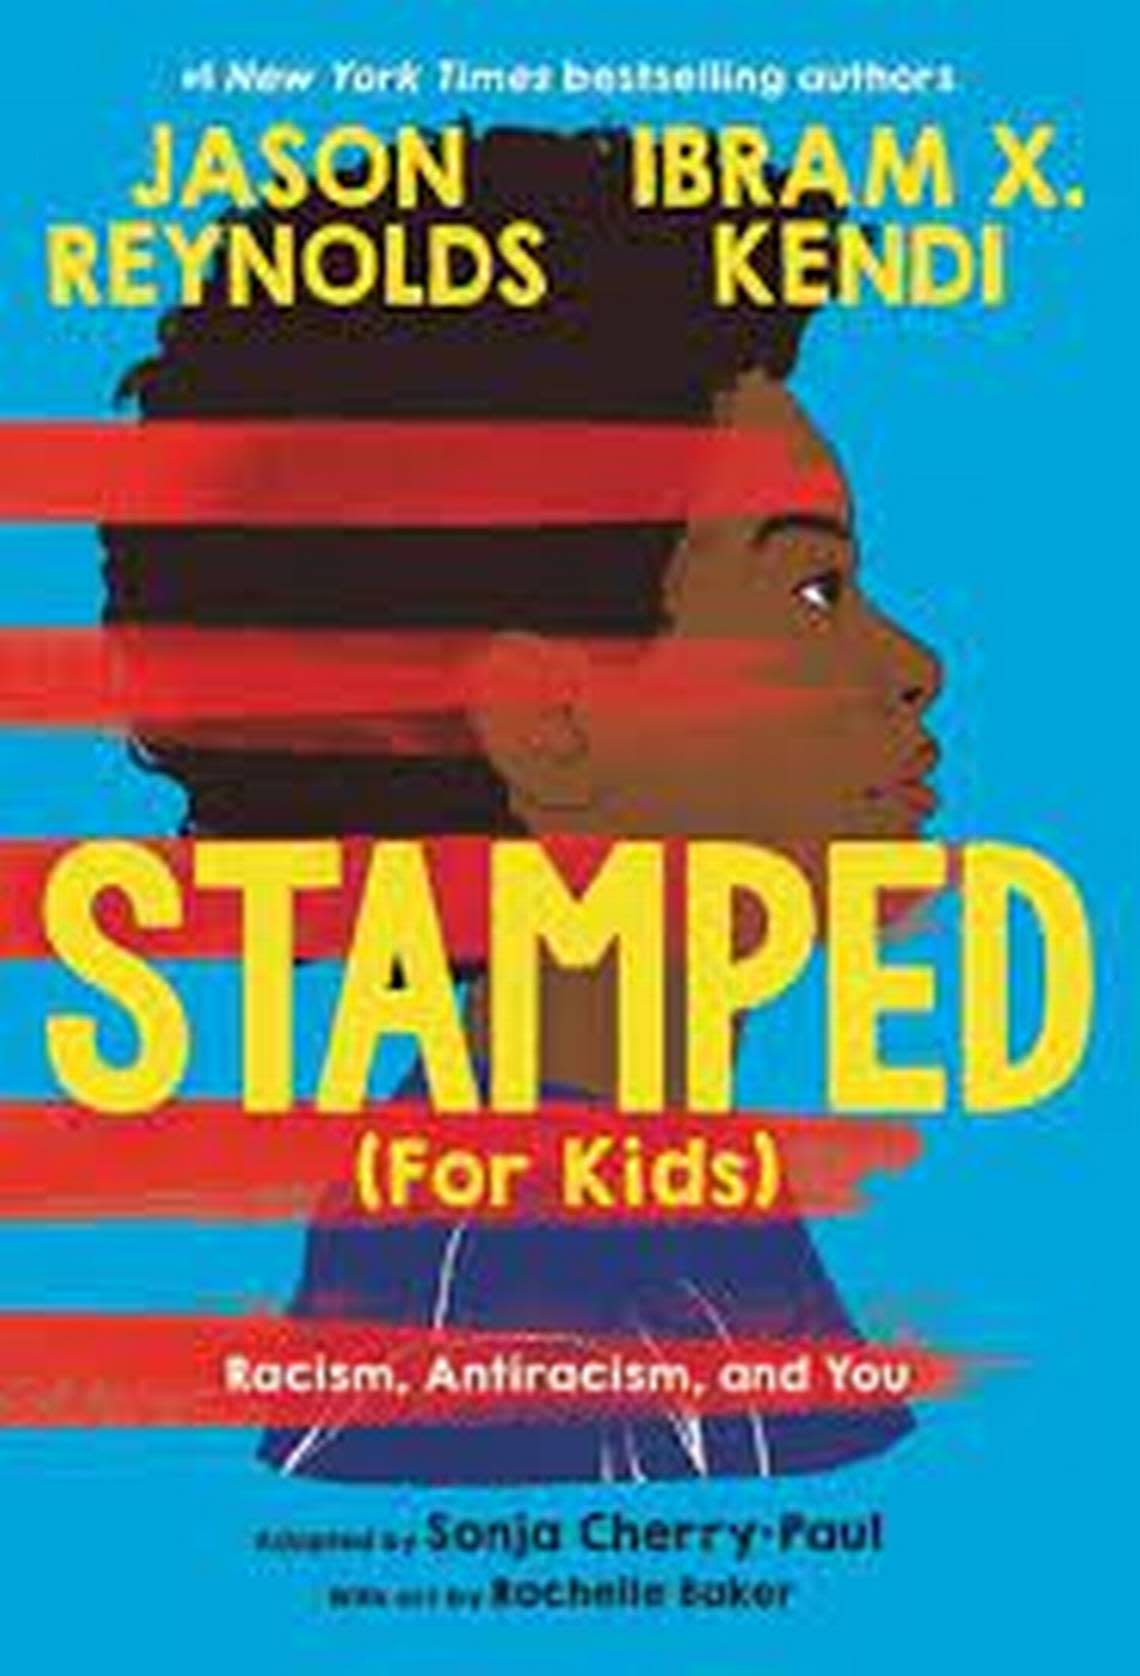 “Stamped” by Jason Reynolds and Ibram X. Kendi is one of the books undergoing review in Beaufort County school libraries.